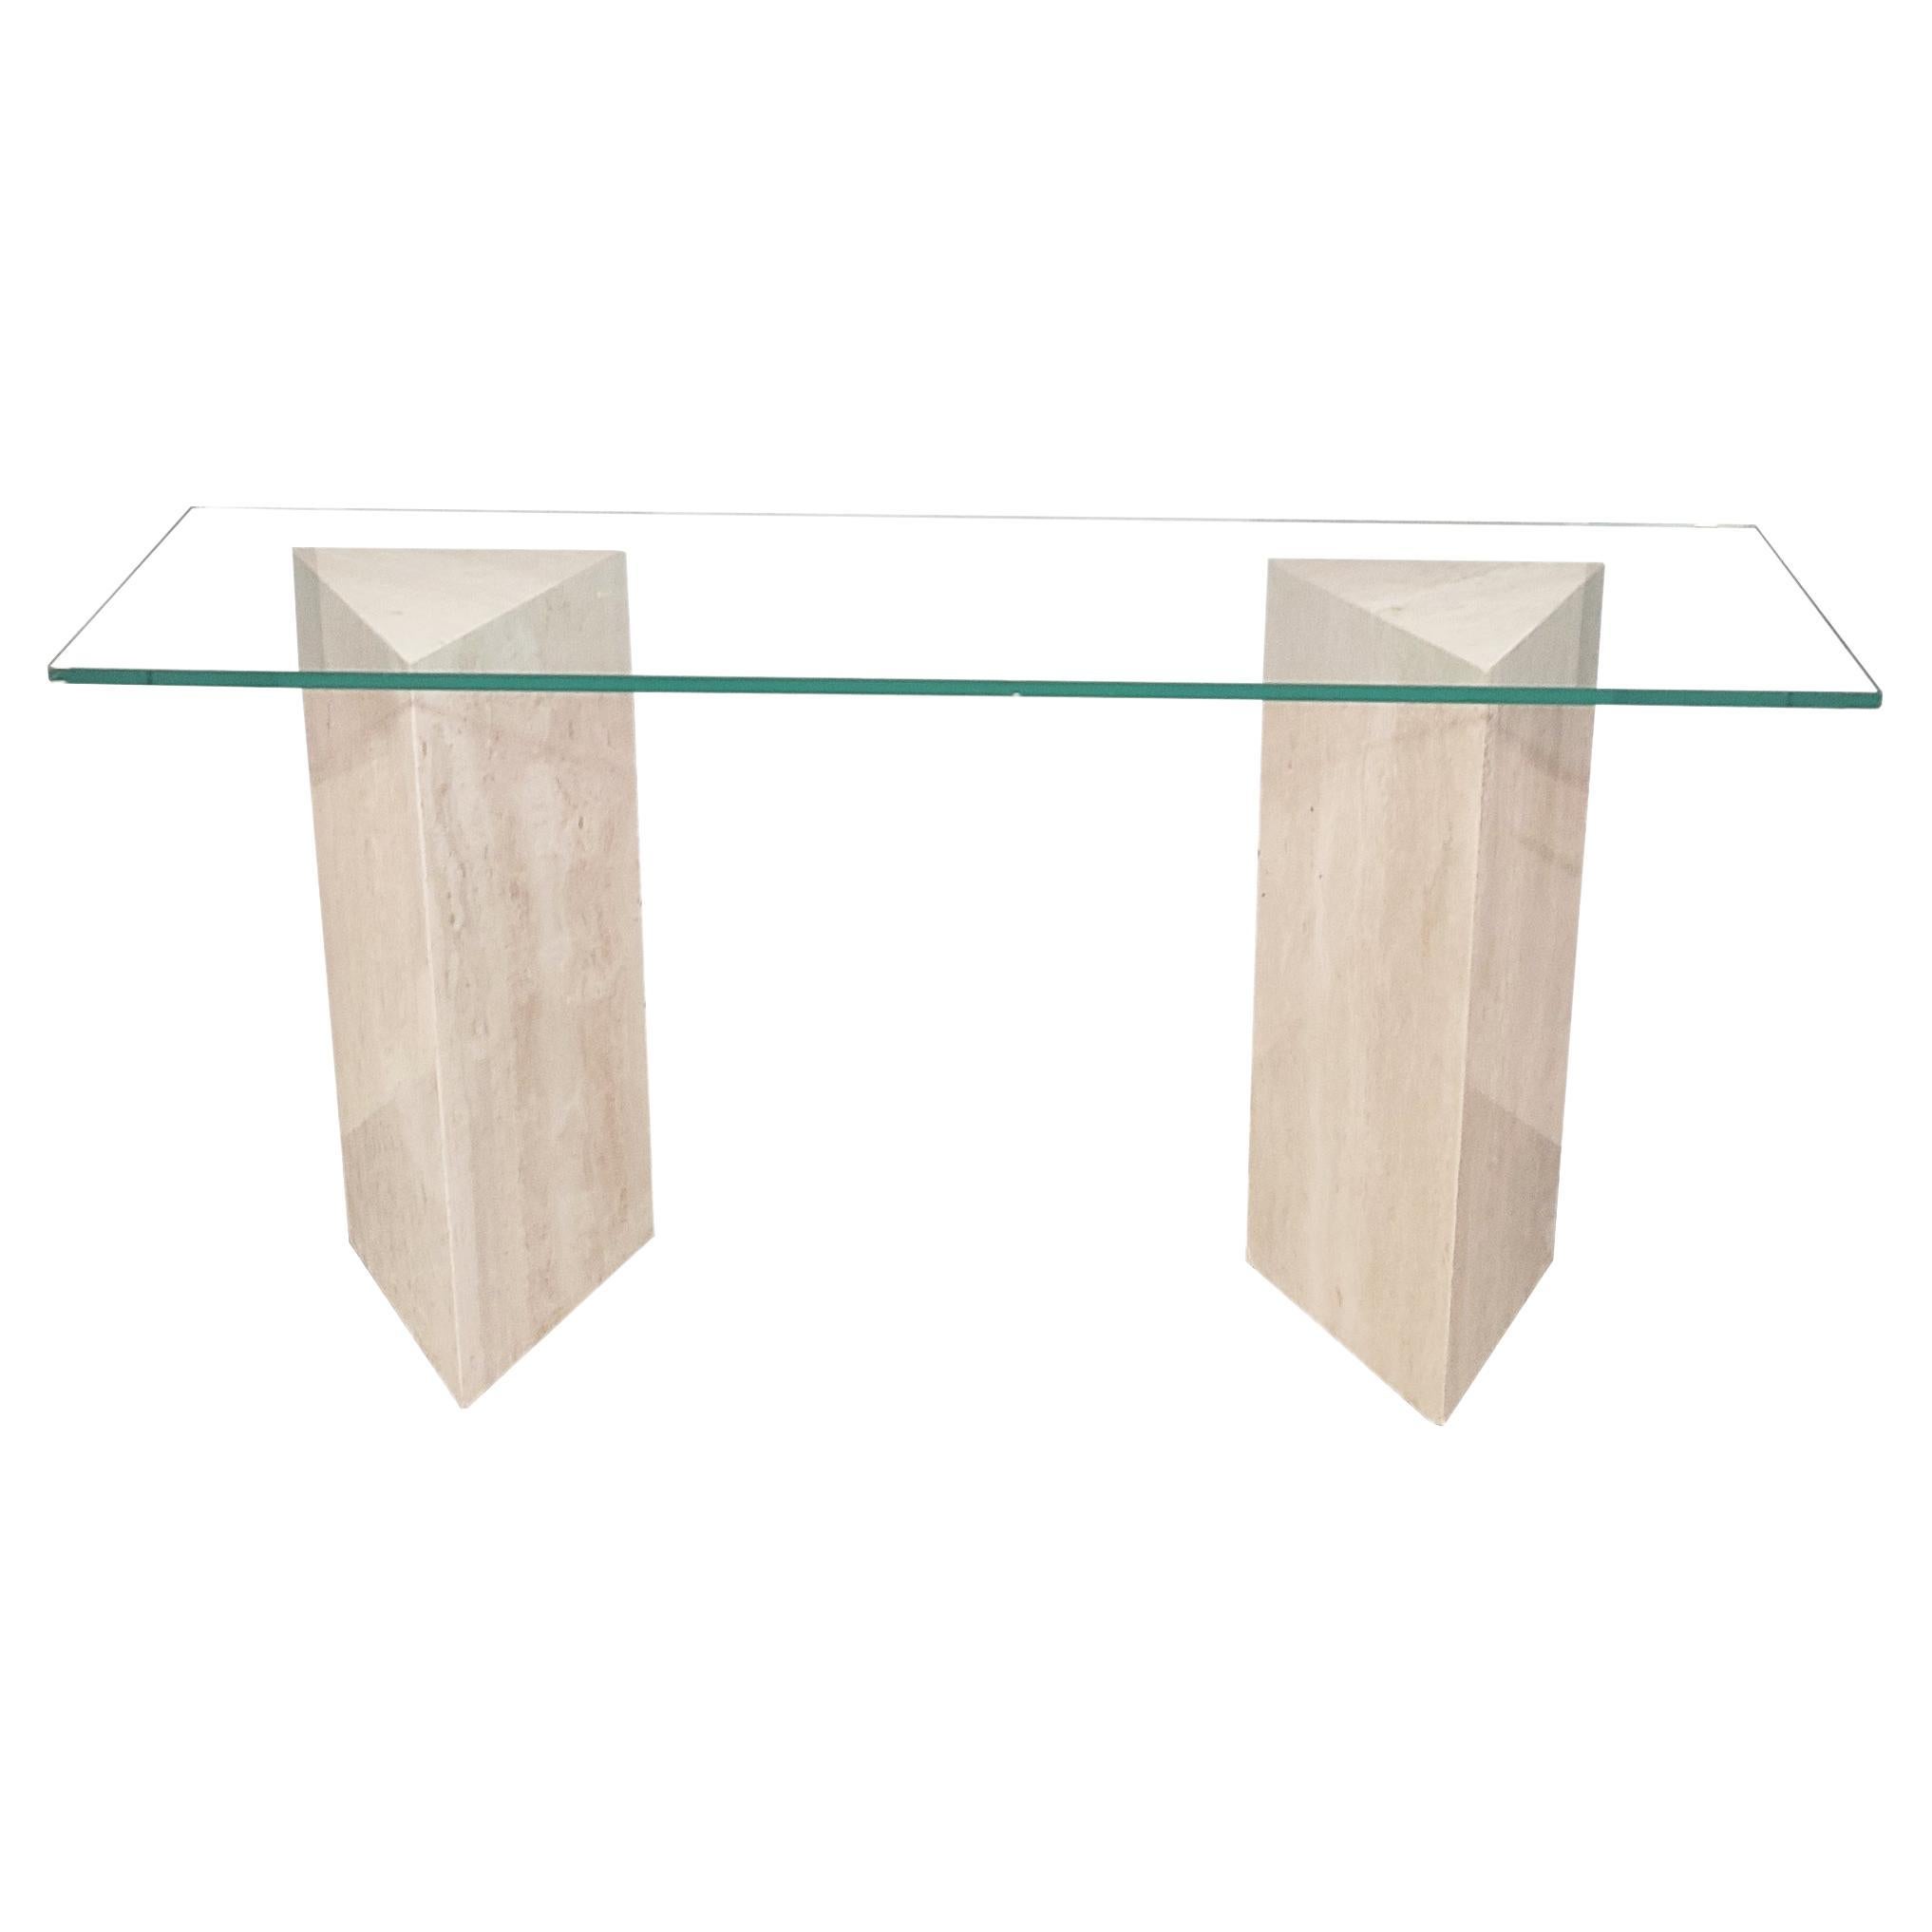 Tria Console Table Travertine Marble MidCentury '99 Modern Design Spain In Stock